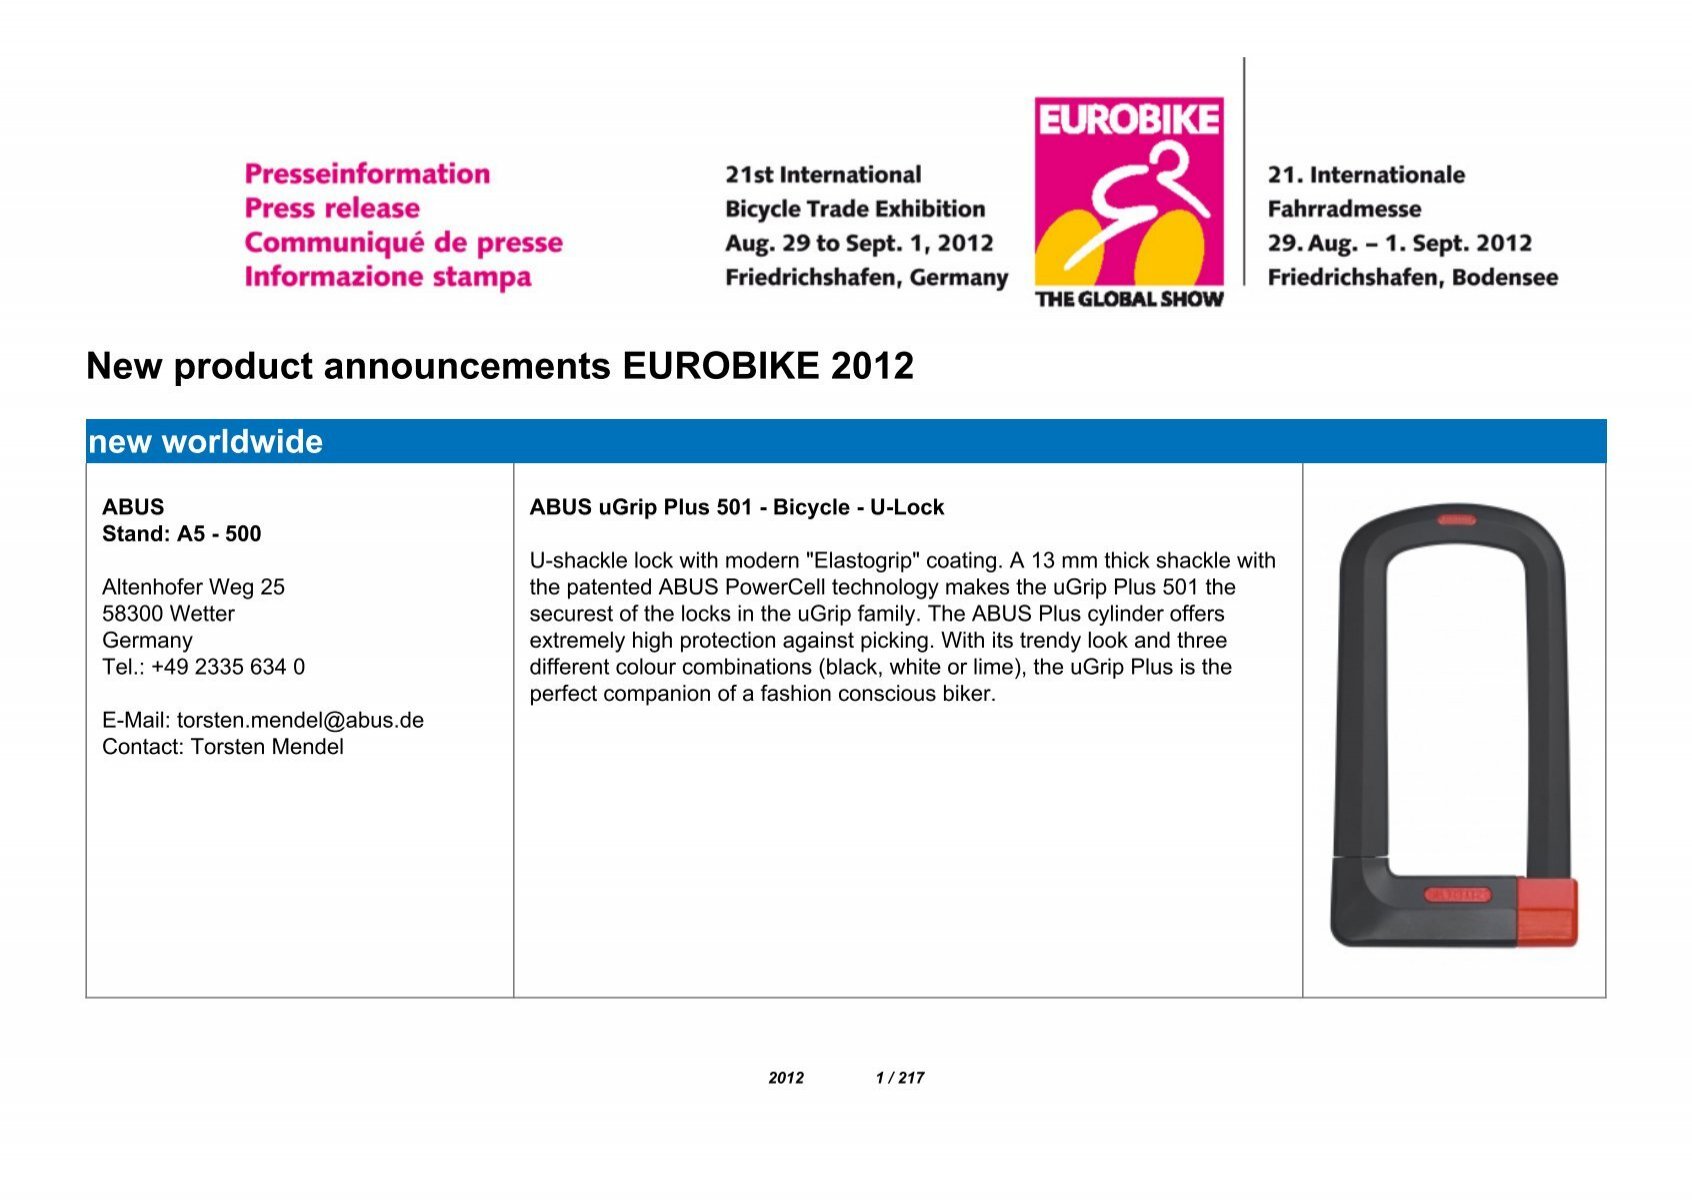 New product announcements EUROBIKE 2012